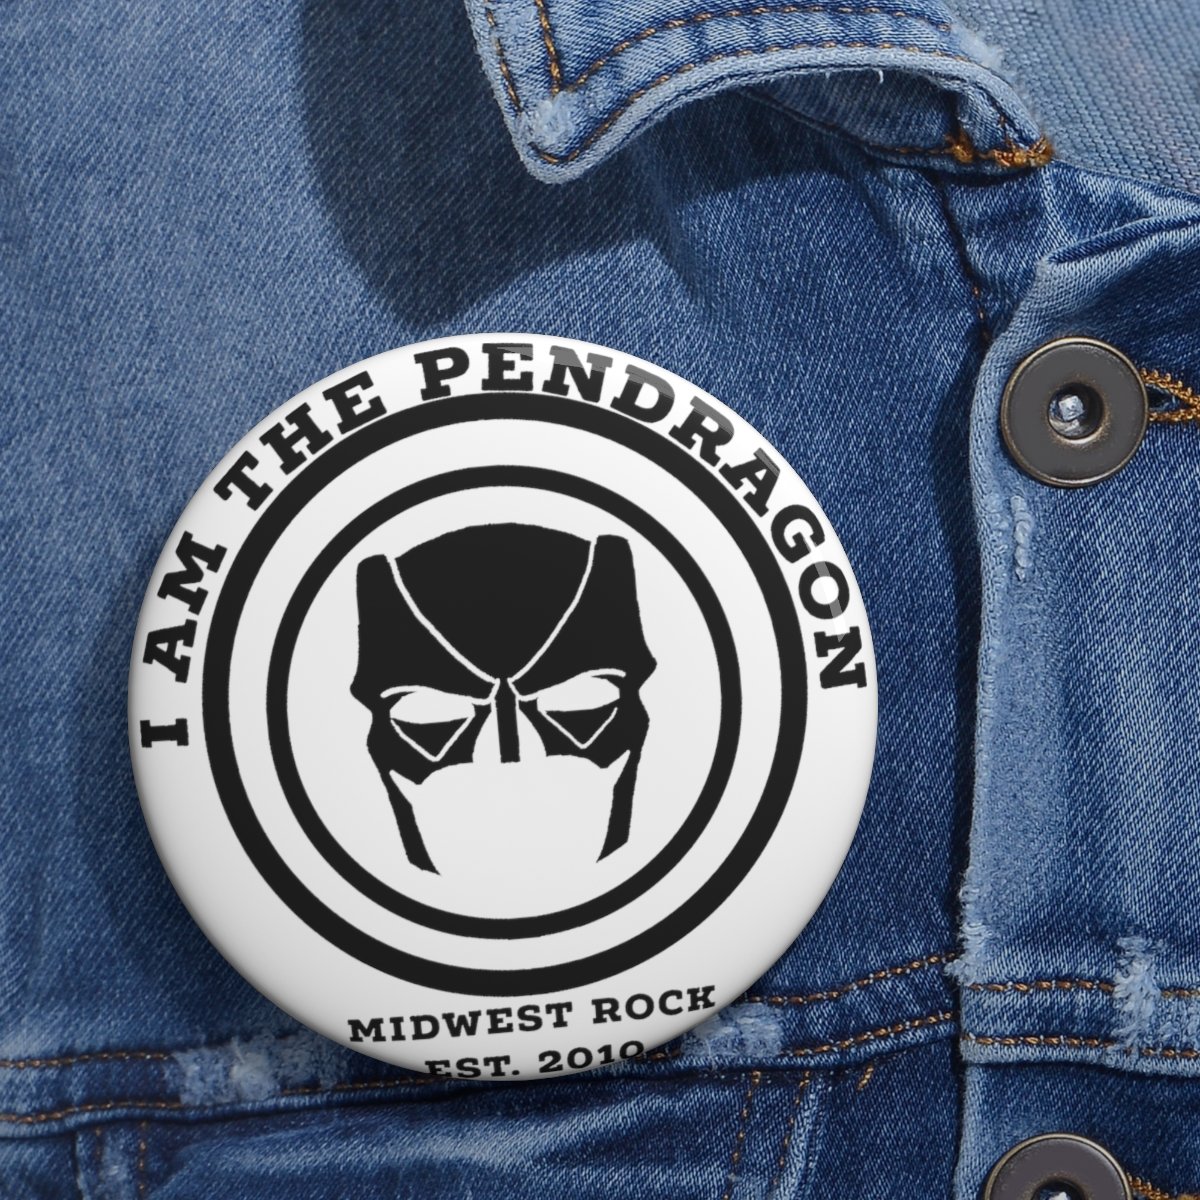 I Am The Pendragon – Midwest Rock Pin Buttons